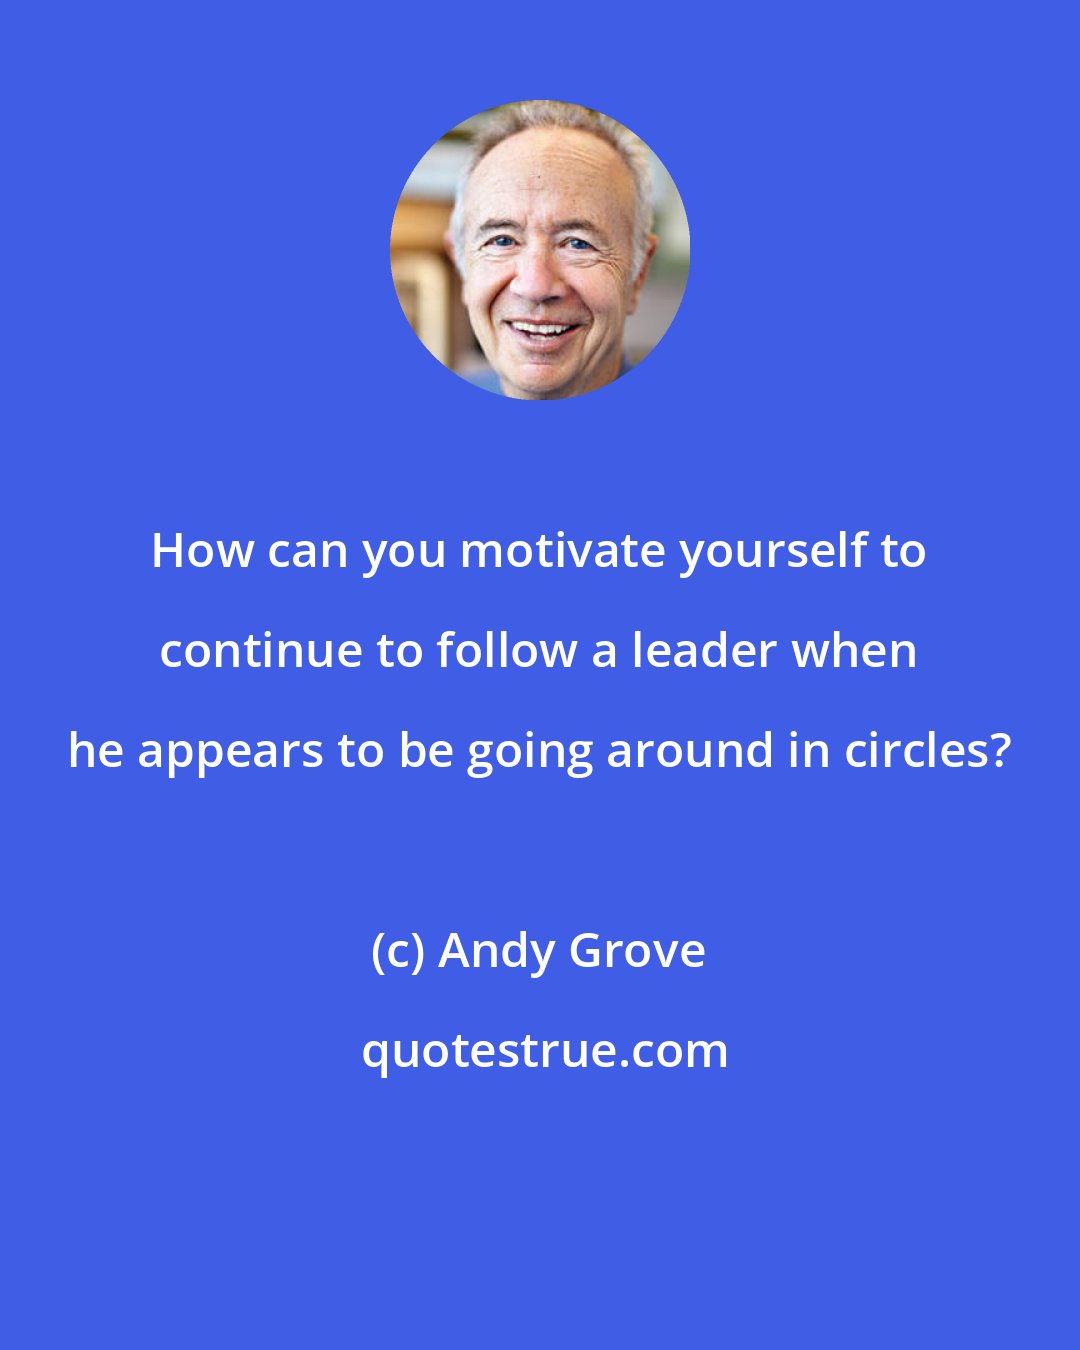 Andy Grove: How can you motivate yourself to continue to follow a leader when he appears to be going around in circles?